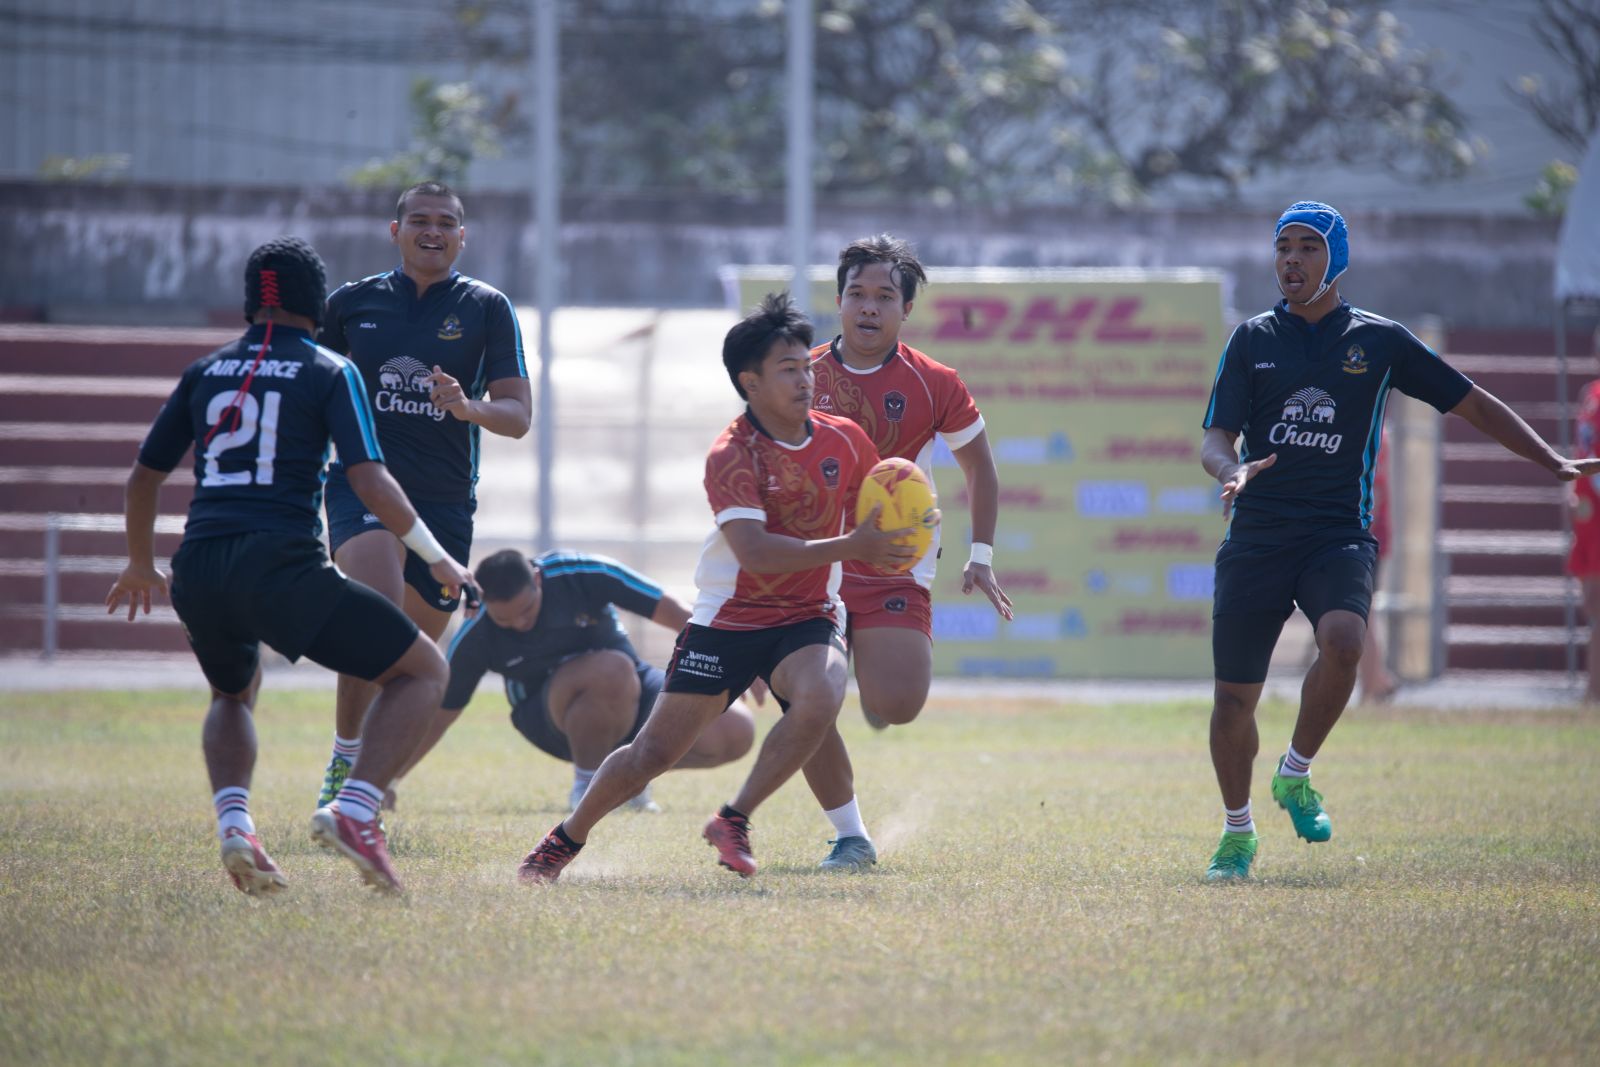 Changing lives with rugby The integration of life-coaching programmes with sport is bringing opportunities to young people in Laos